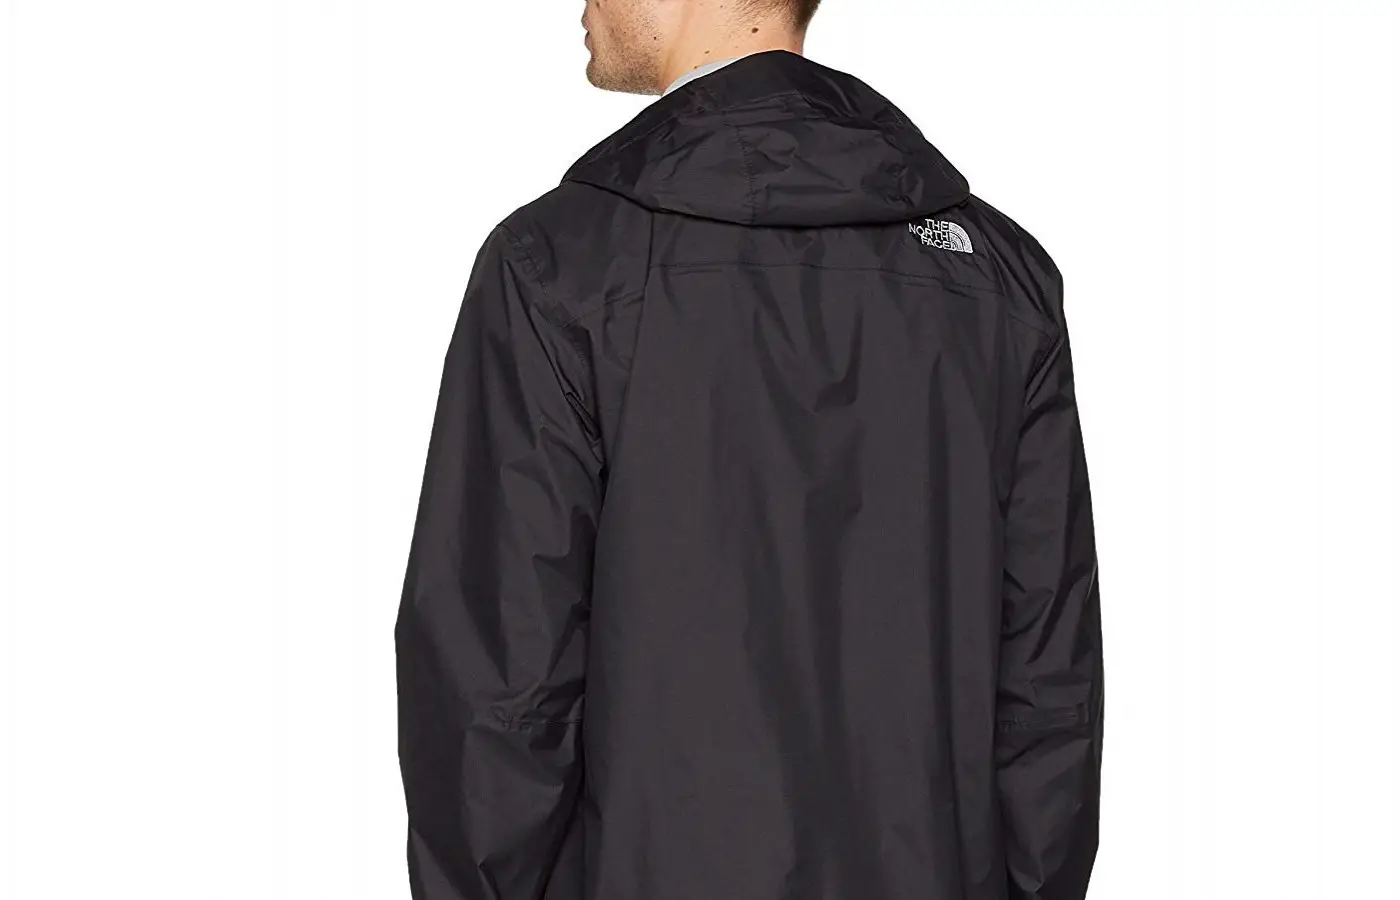 The North Face Venture 2 is weather and rainproof to protect the wearer from the elements.